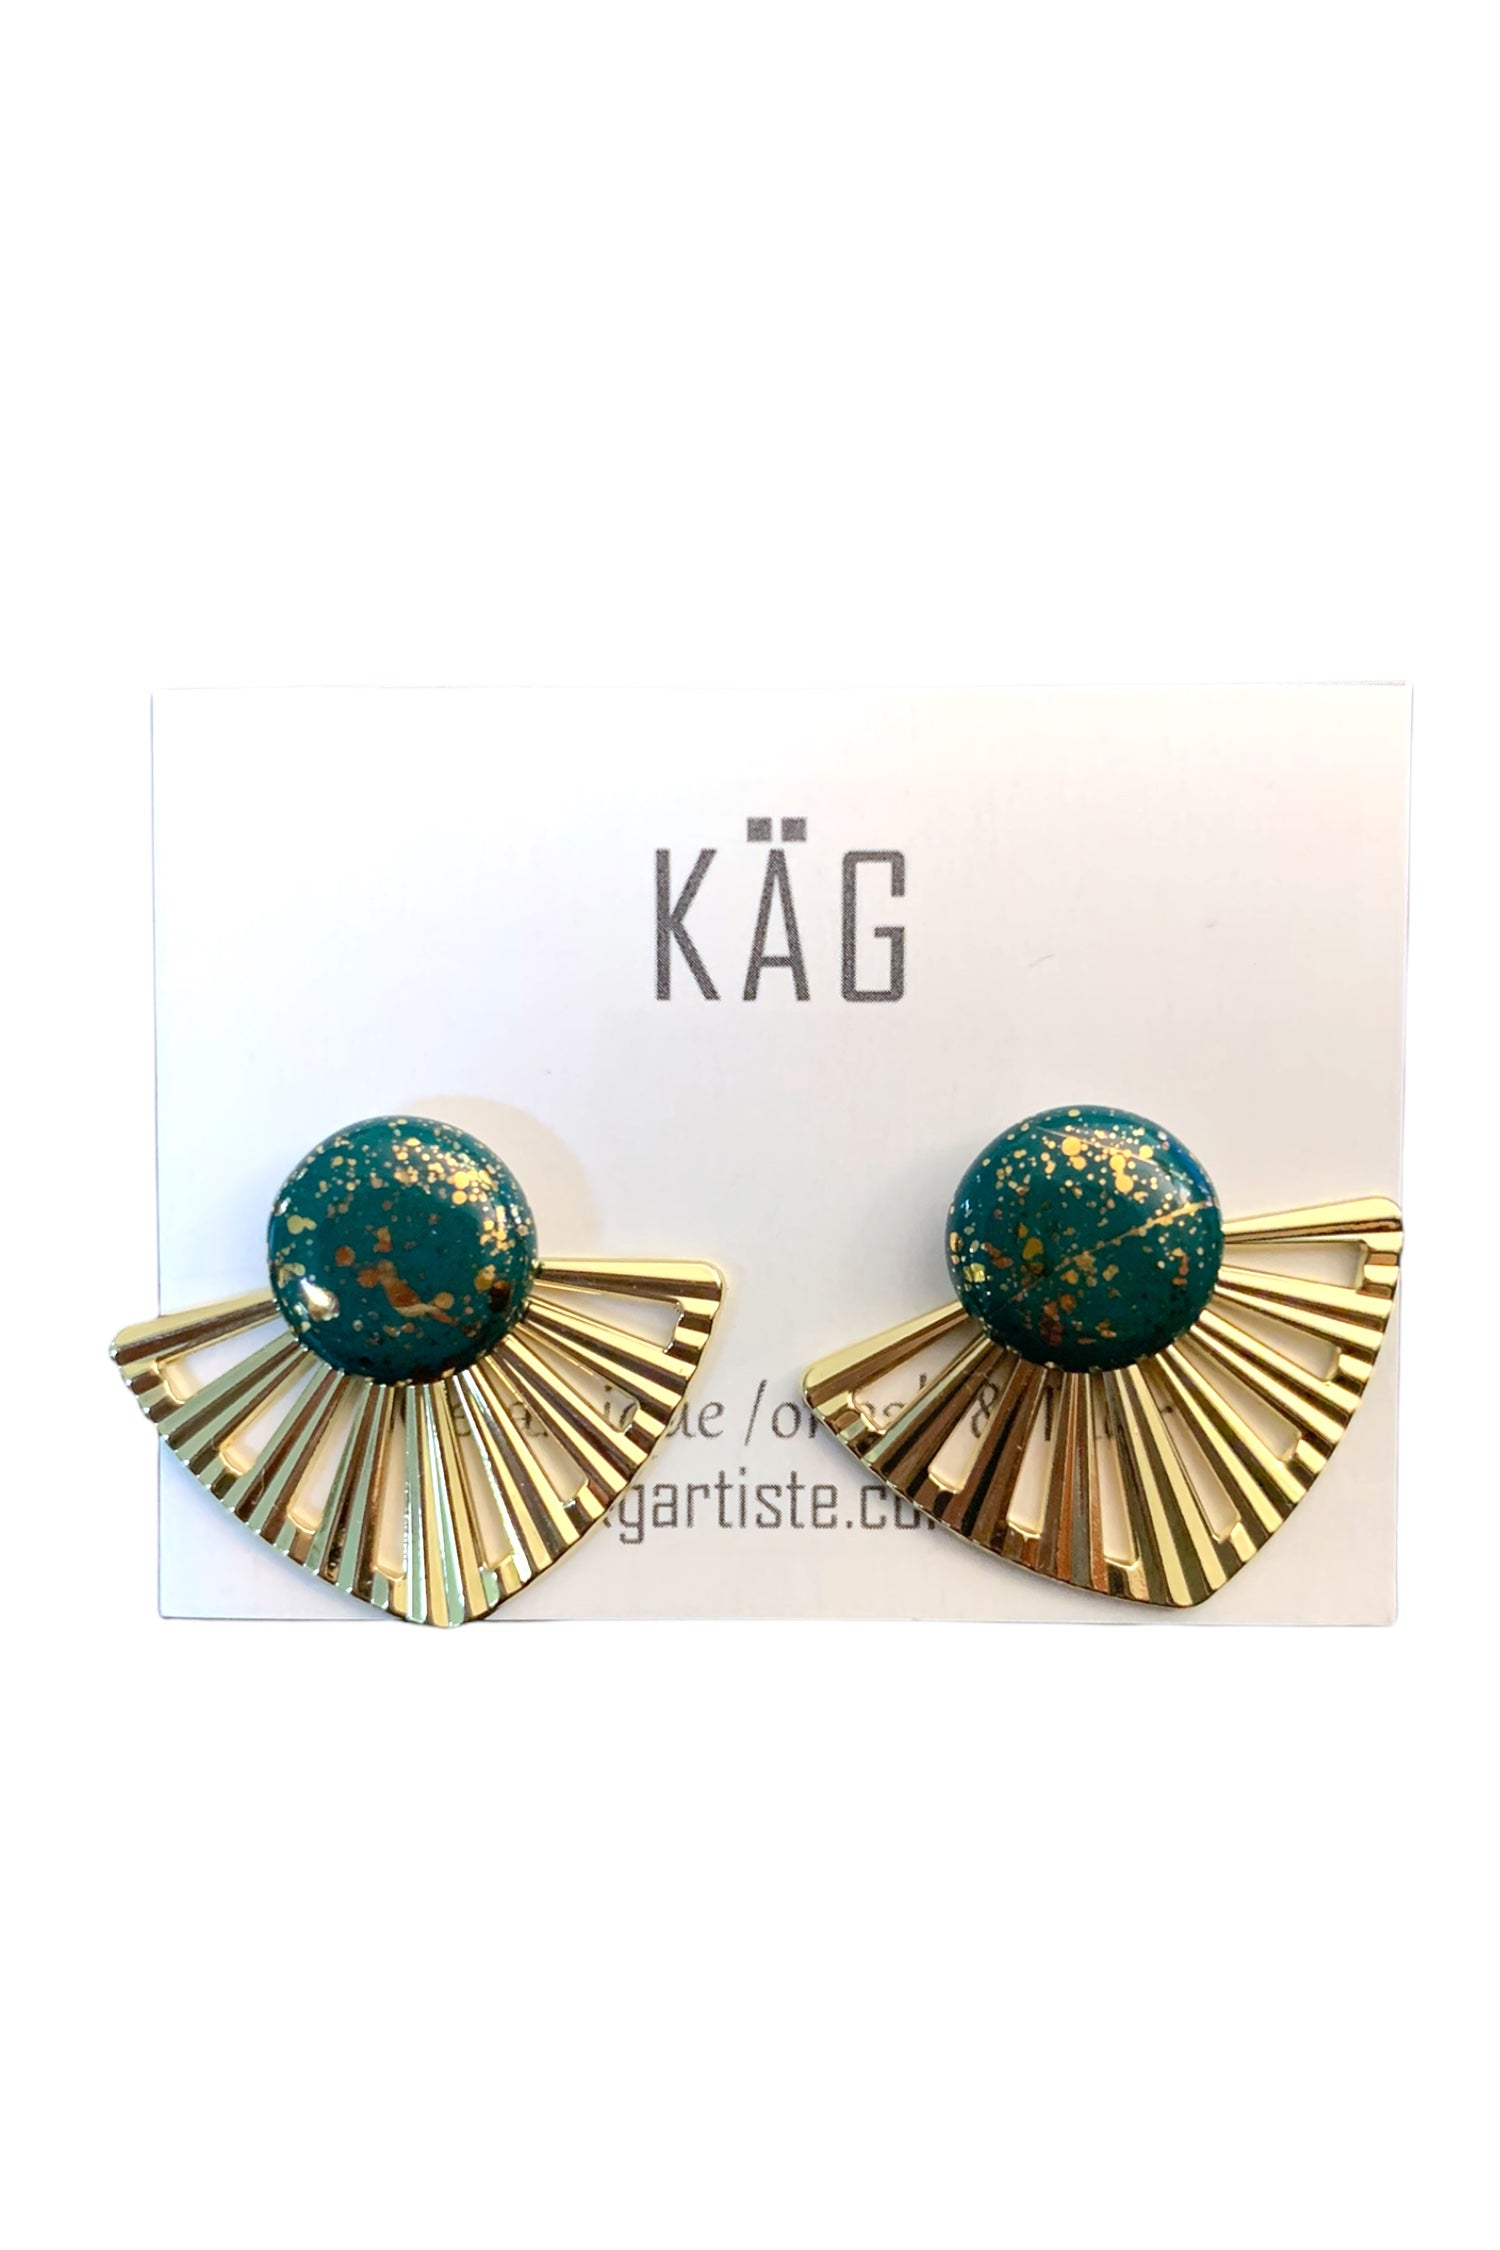 Ceramic Studs with Gold Jacket Earrings